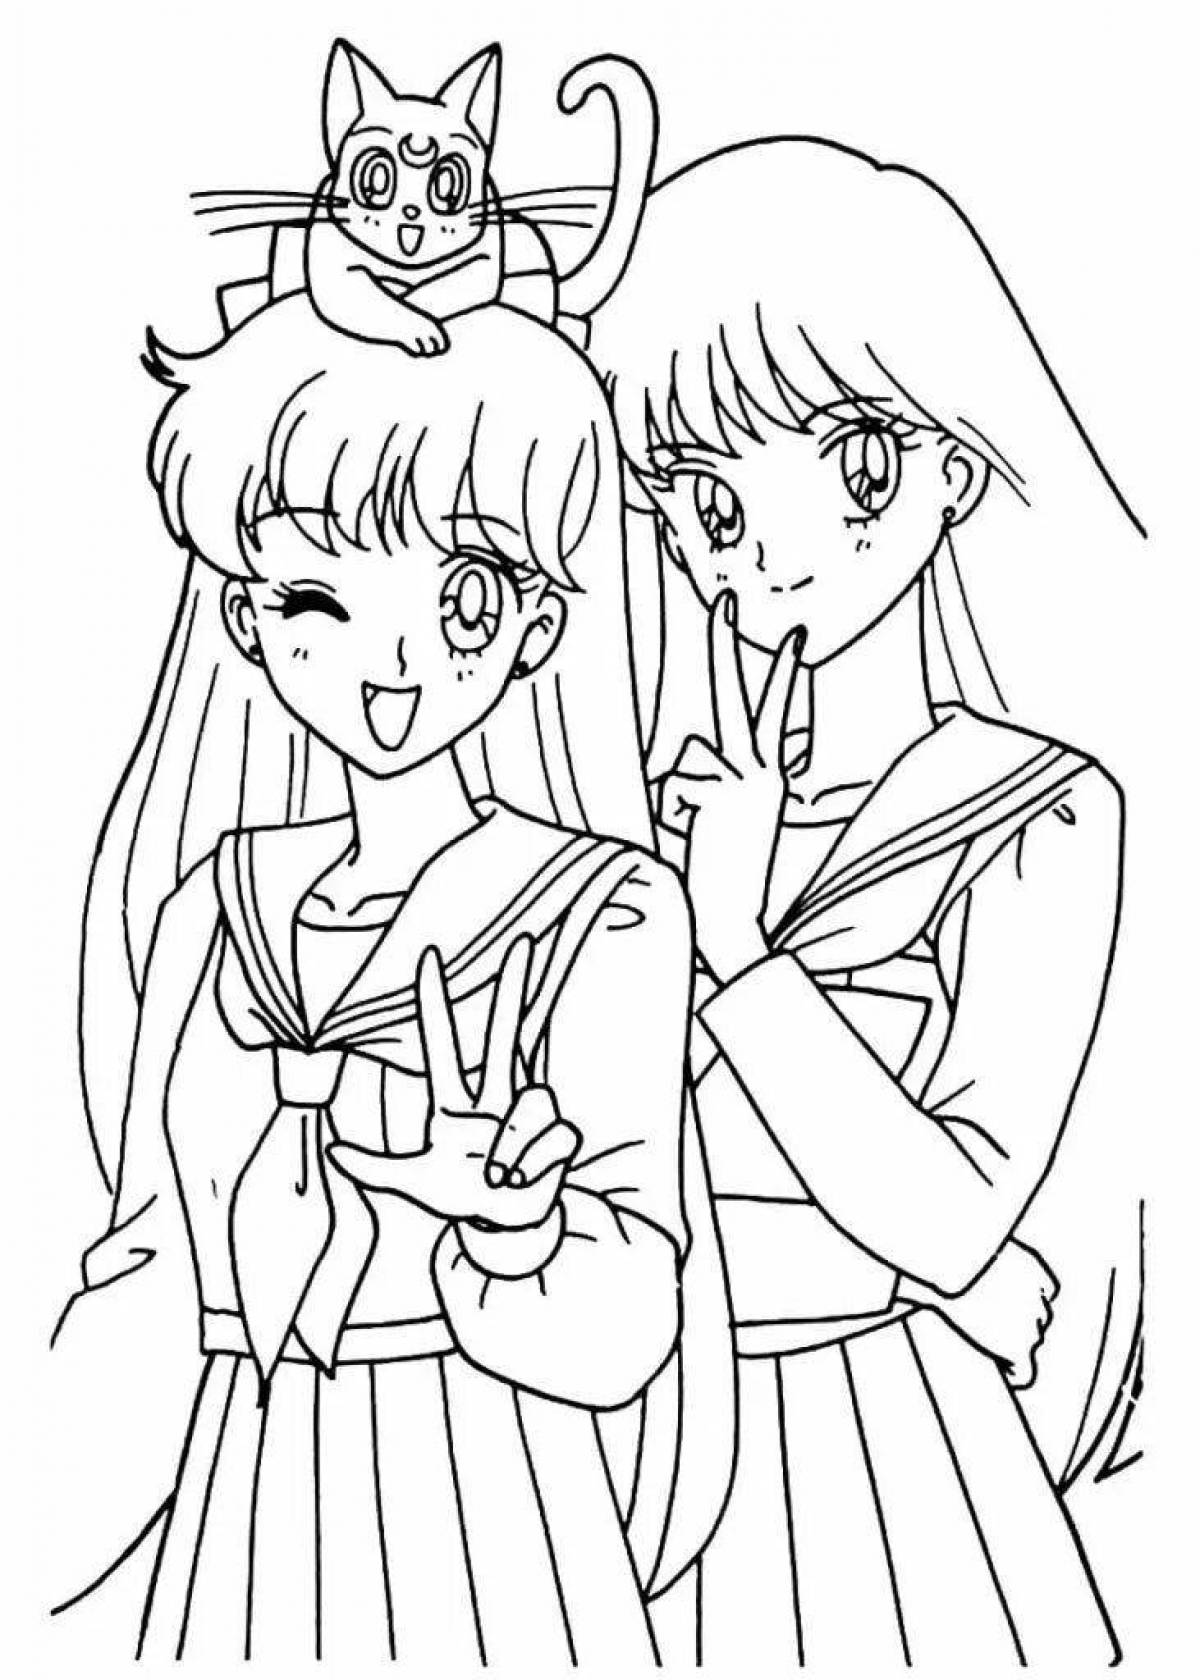 Coloring radiant anime sailor moon